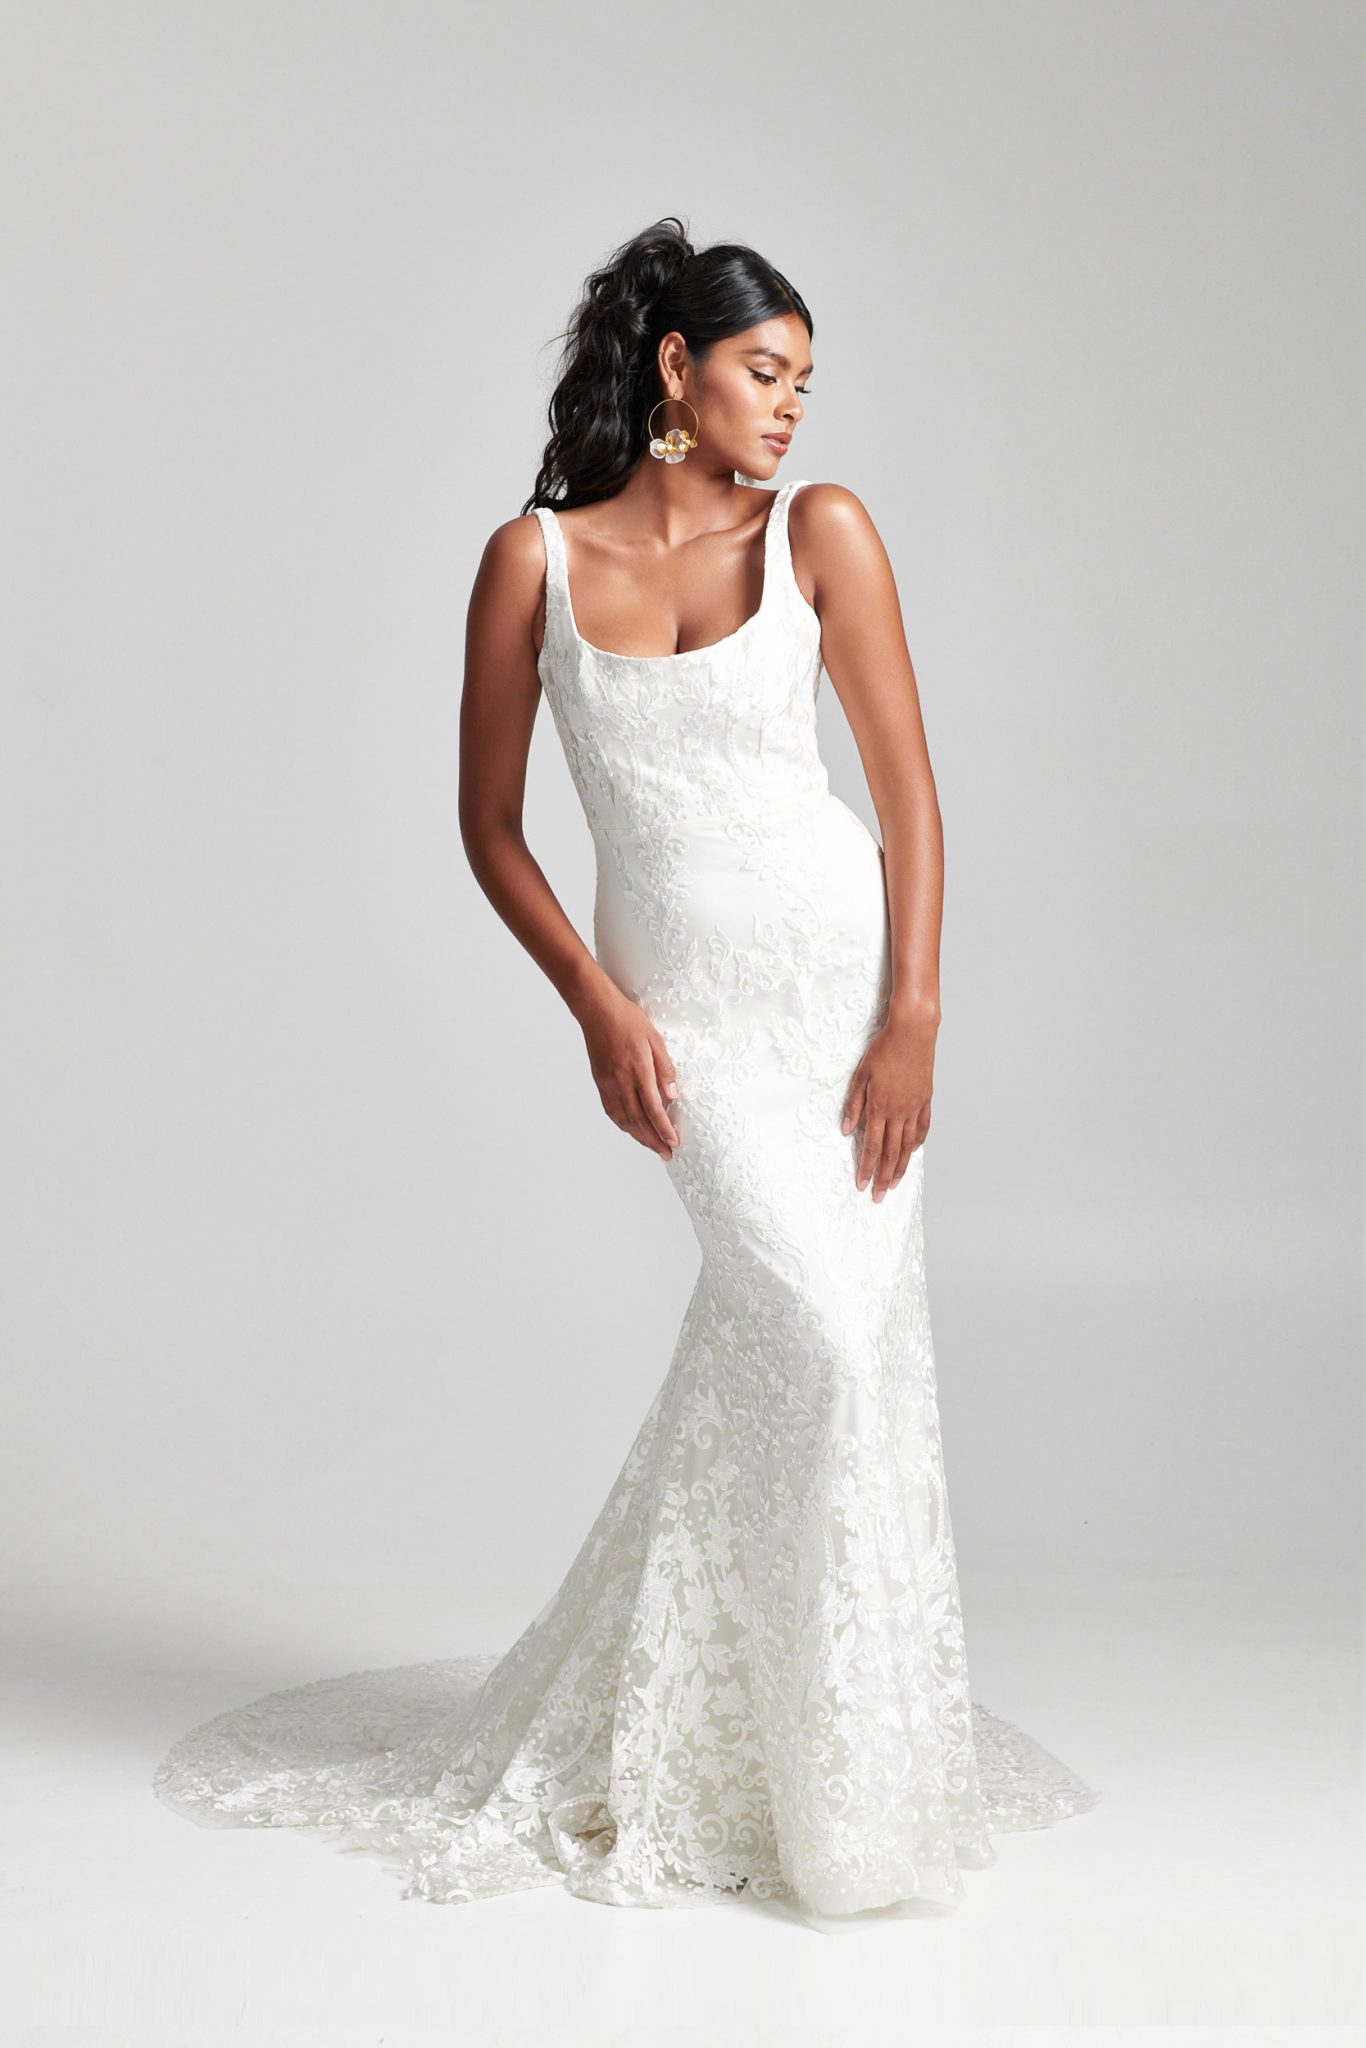 Top Sleeveless Wedding Dress of the decade Learn more here 